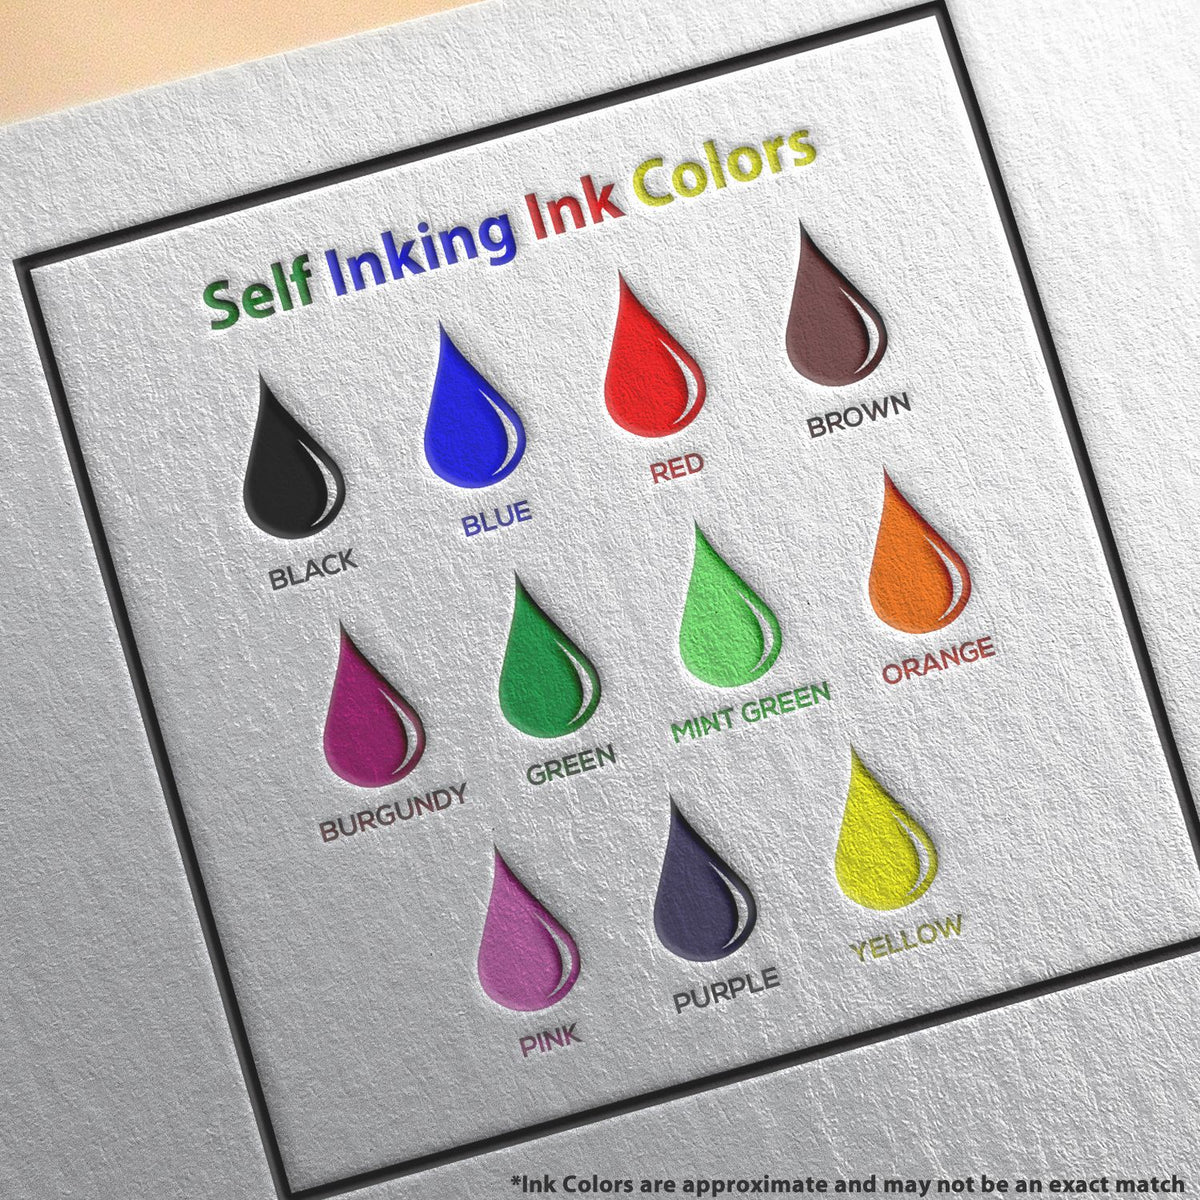 A picture showing the different ink colors or hues available for the Self-Inking Montana PE Stamp product.